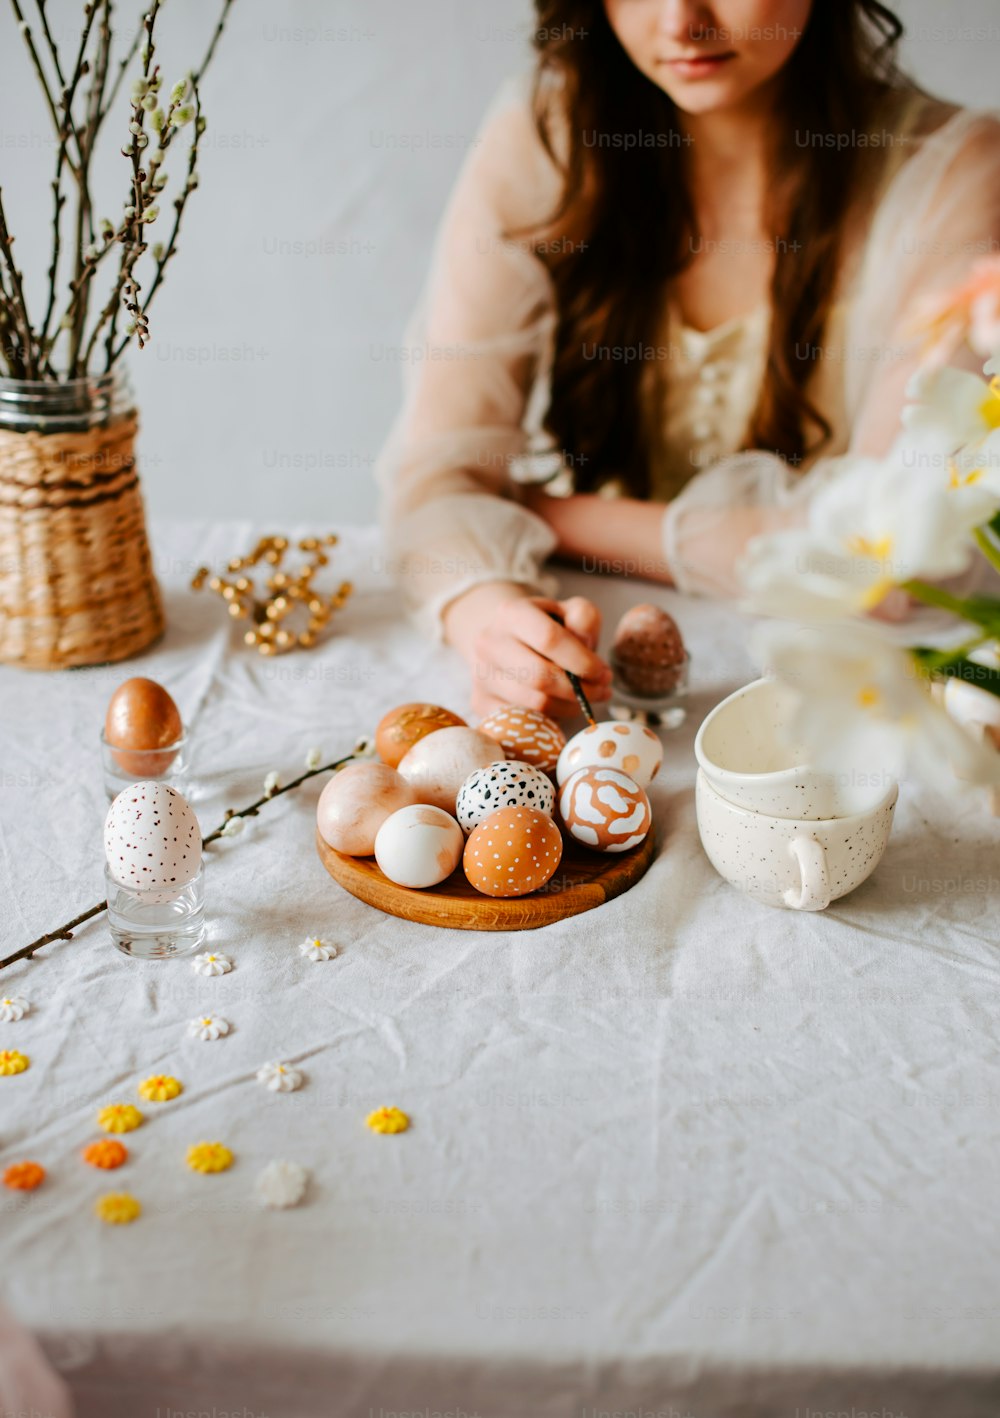 a woman sitting at a table with eggs and flowers